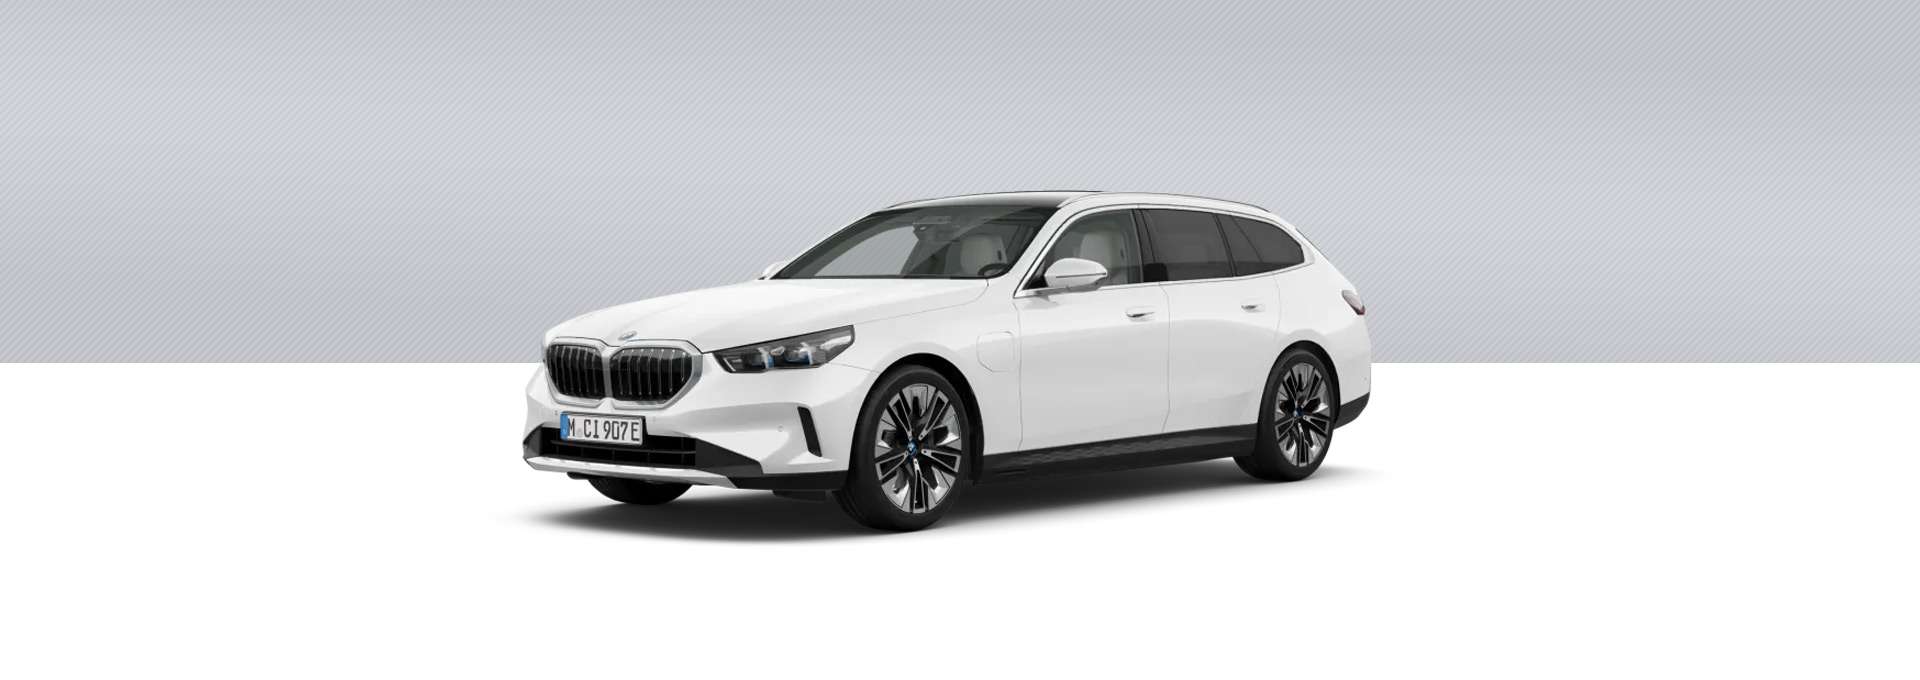 BMW Nuevo Serie 5 Touring Híbrido Enchufable